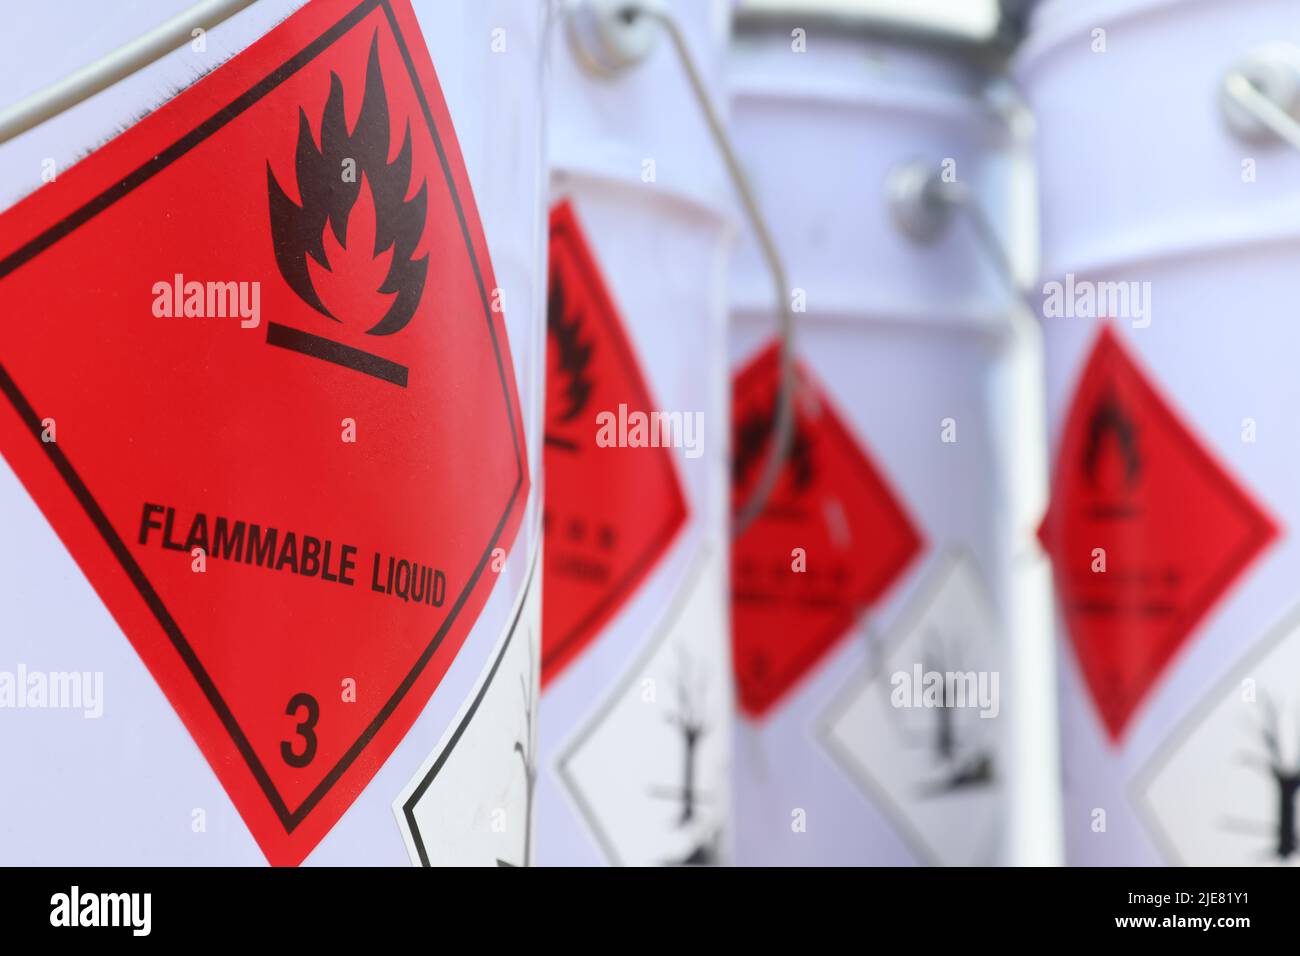 Flammable liquid symbol on the chemical tank Stock Photo